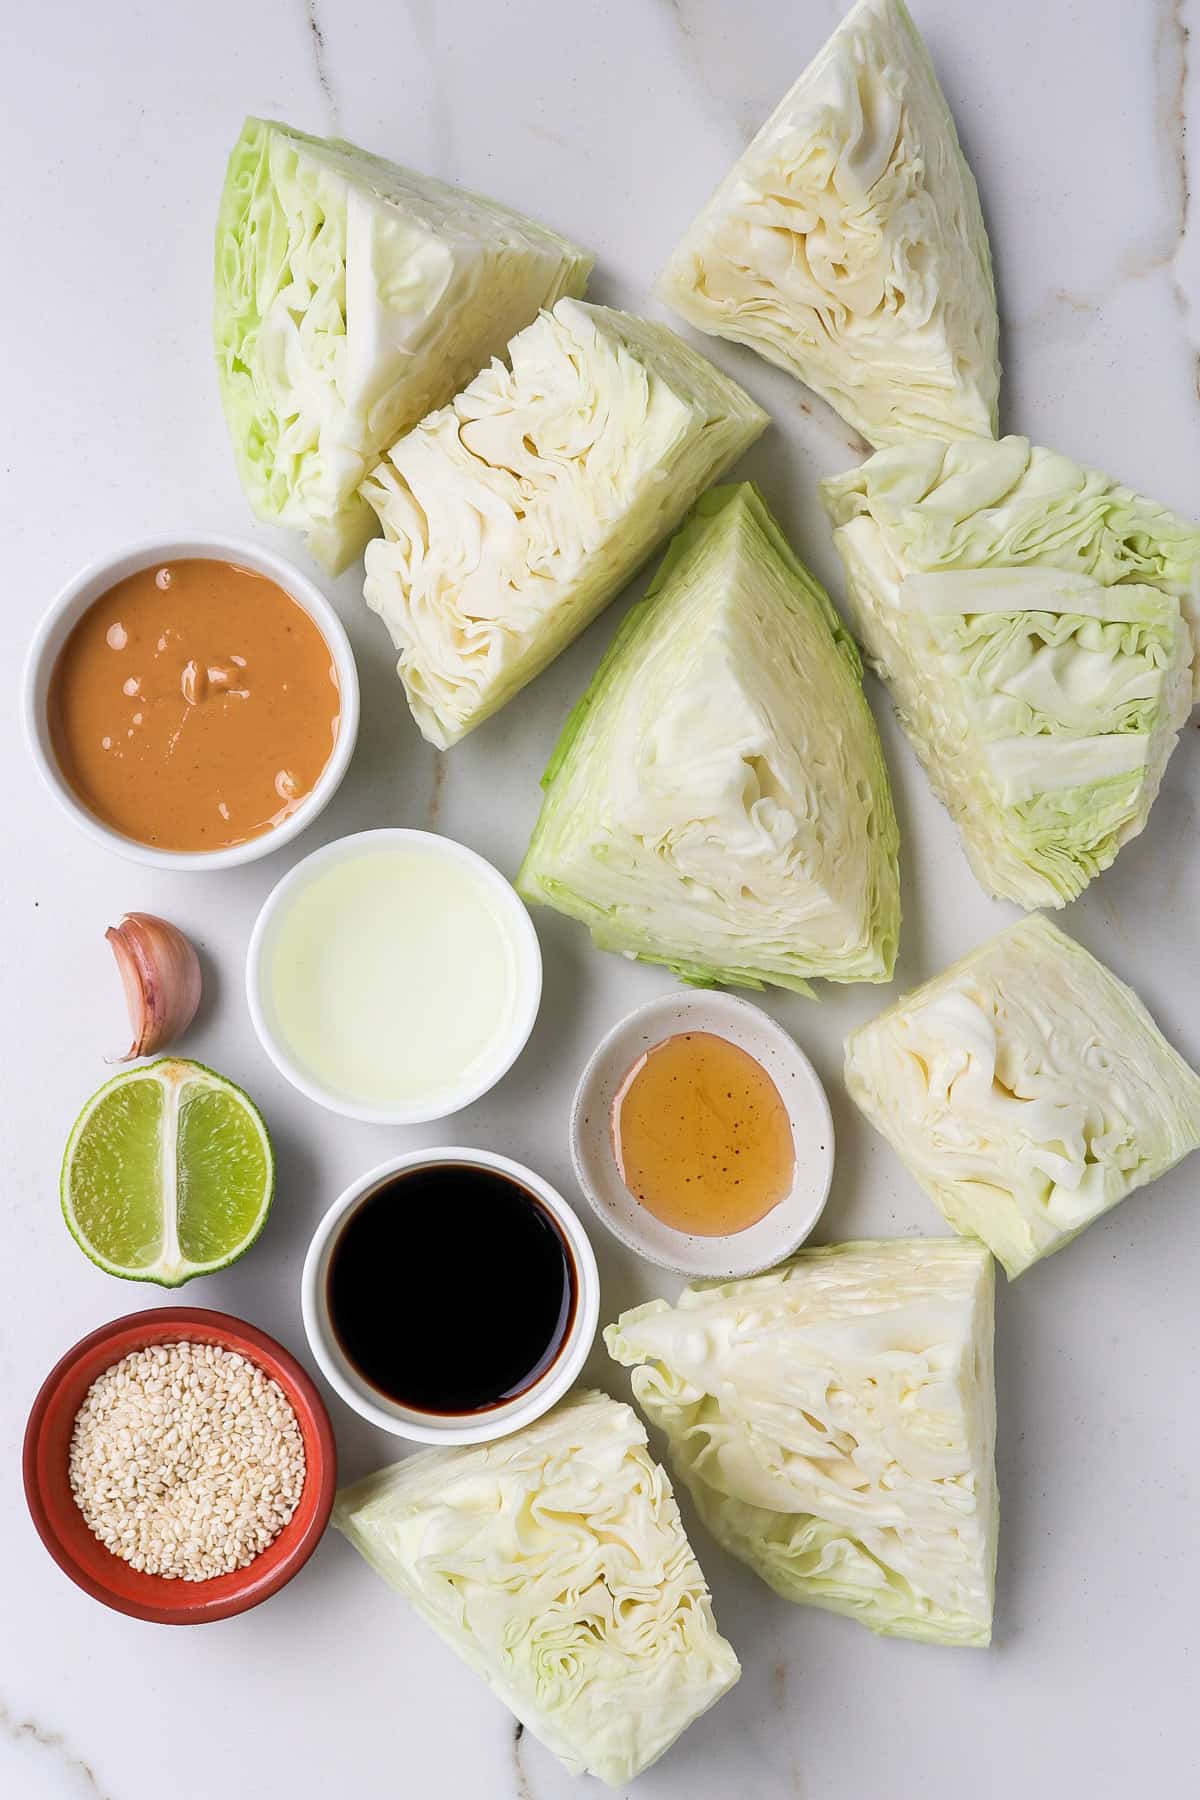 Ingredients shown to make this cabbage recipe.